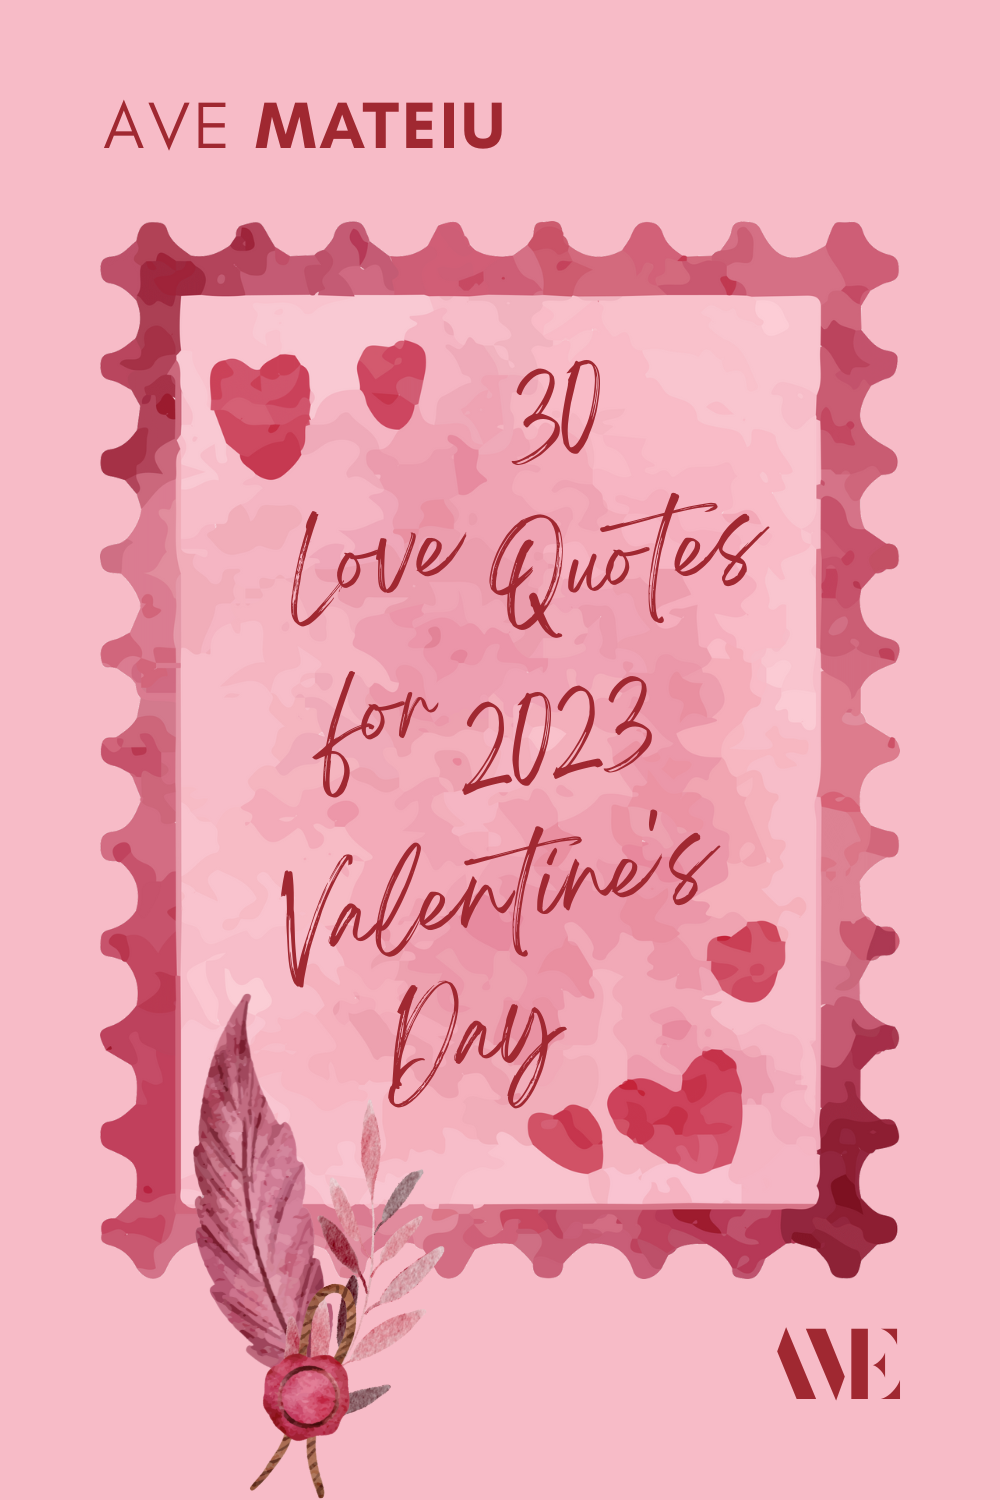 Pin by things I love on 00 in 2023